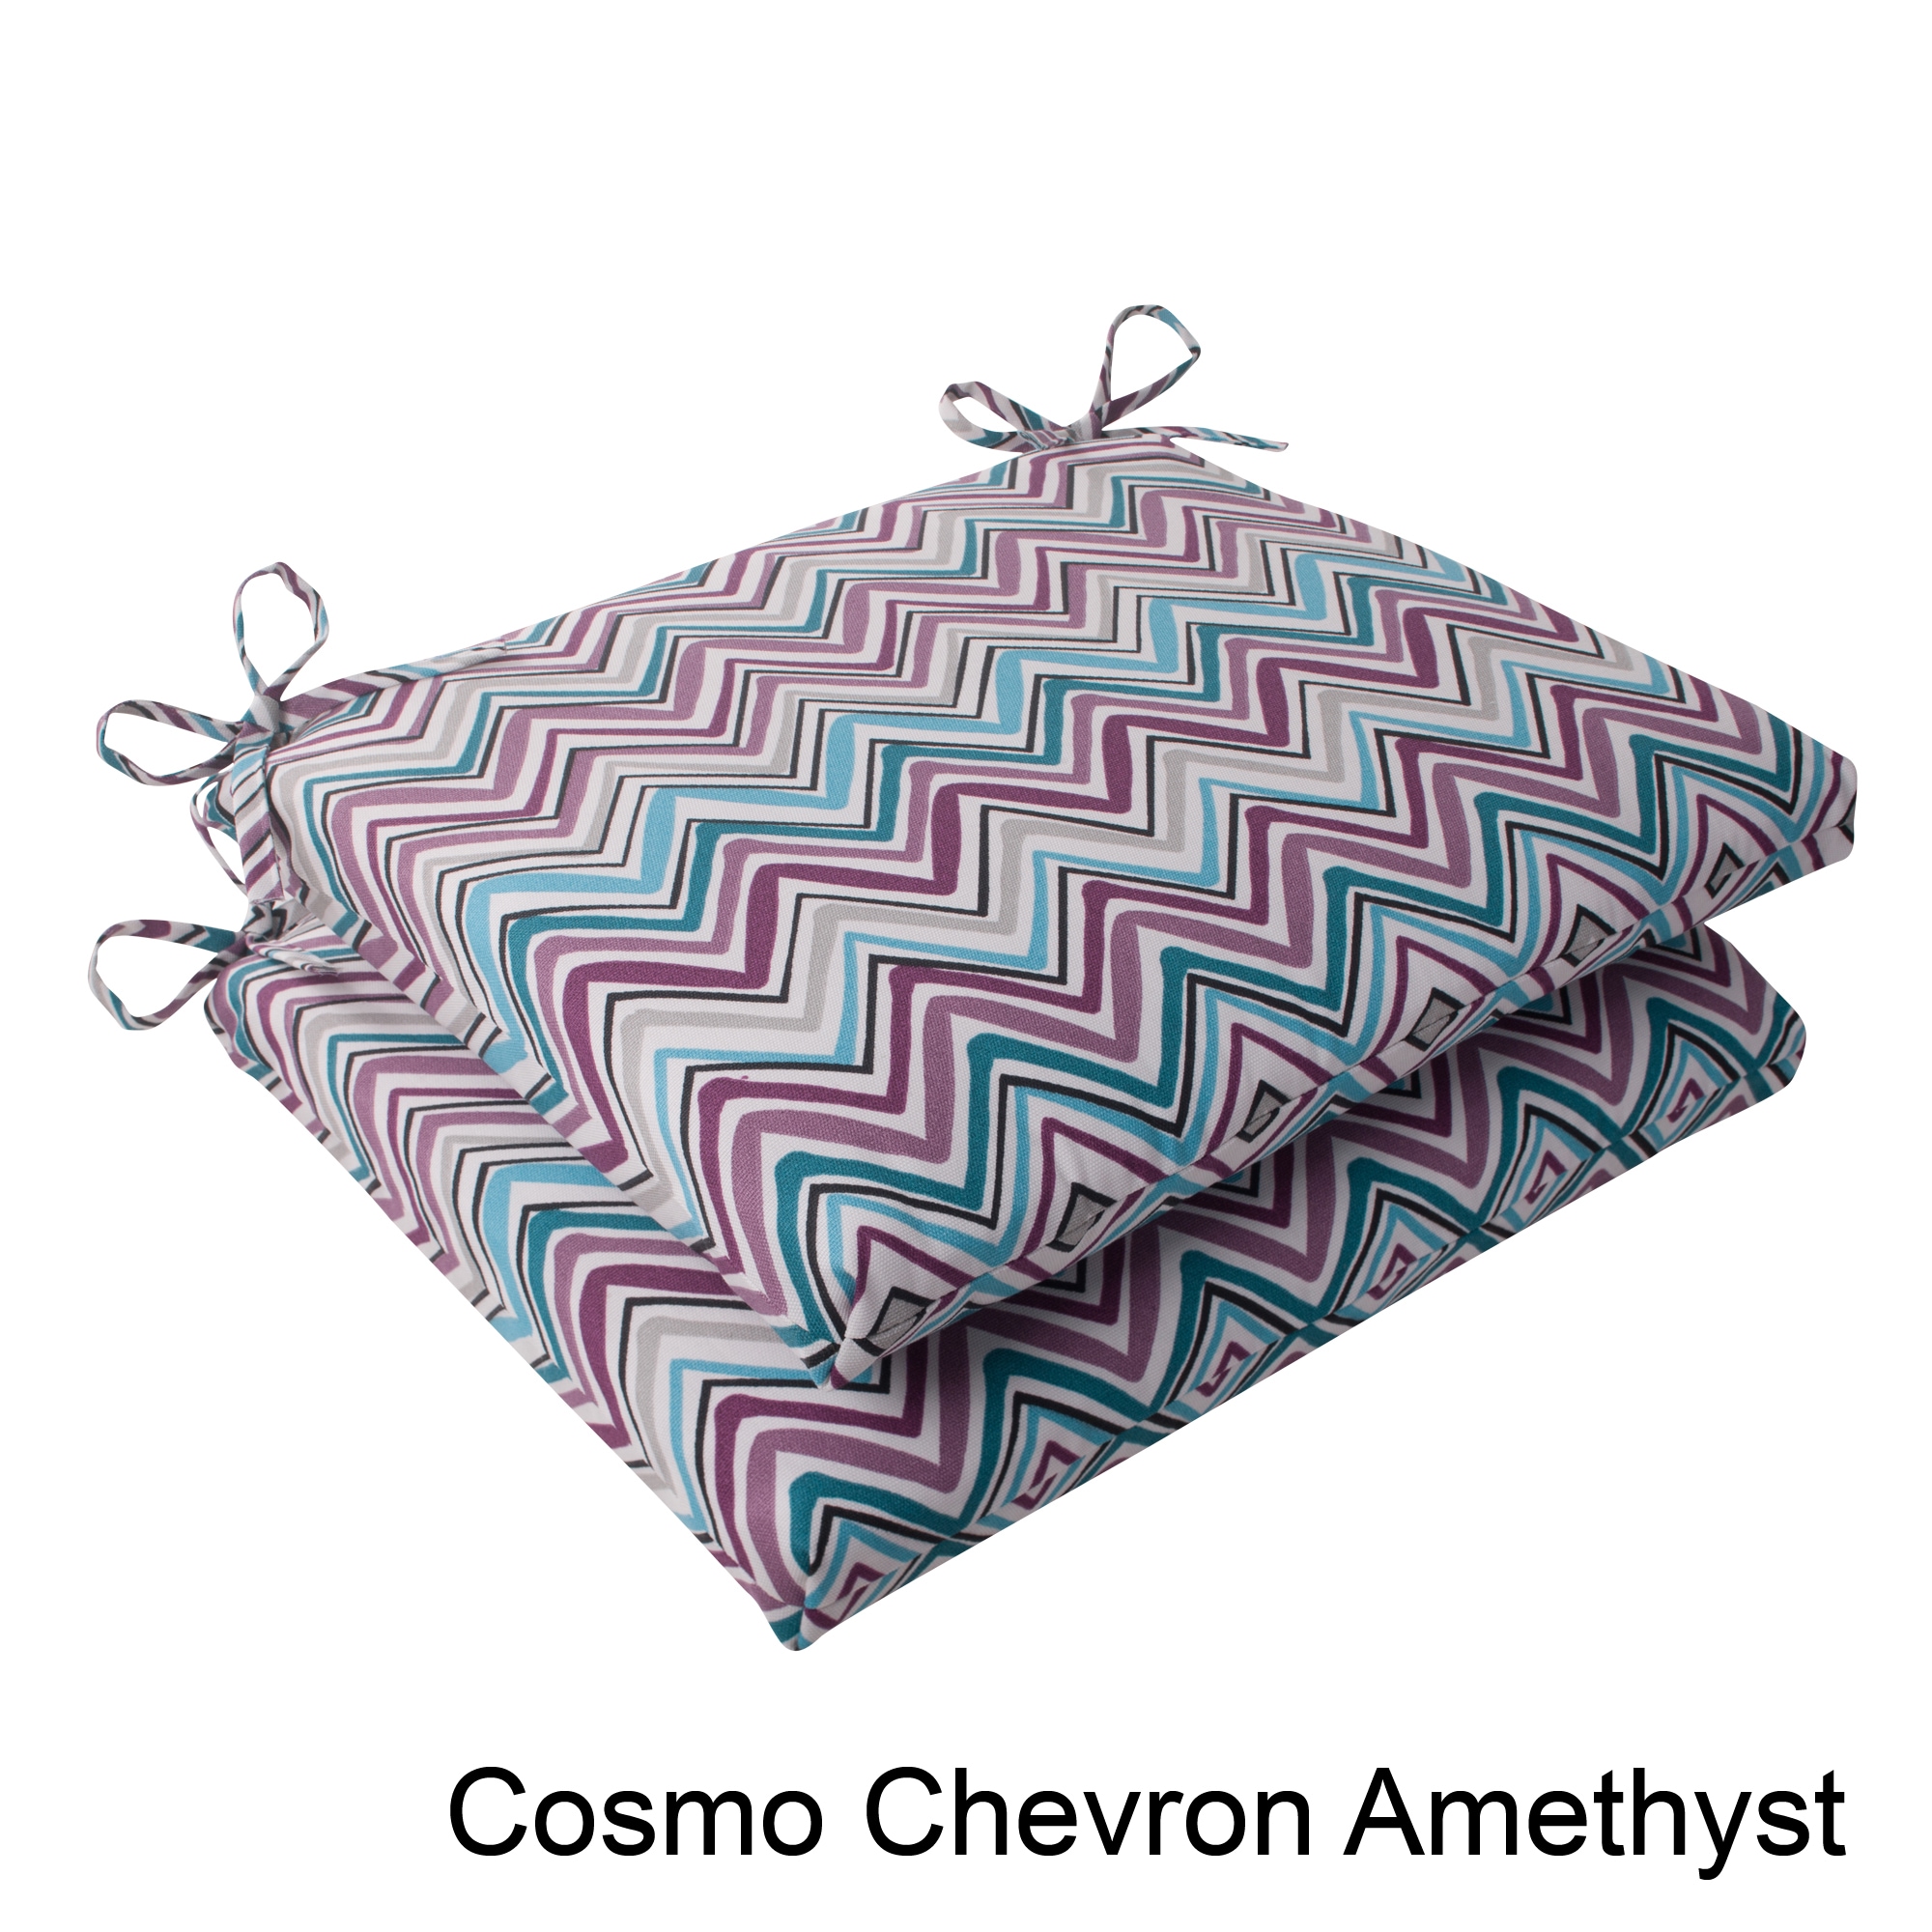 Pillow Perfect Cosmo Chevron Polyester Squared Outdoor Seat Cushions (set Of 2) (Amethyst, mulit, lily padMaterials 100 percent spun polyesterFill 100 percent polyester fiberClosure Sewn seamWeather resistant YesUV protection Care instructions Spot c